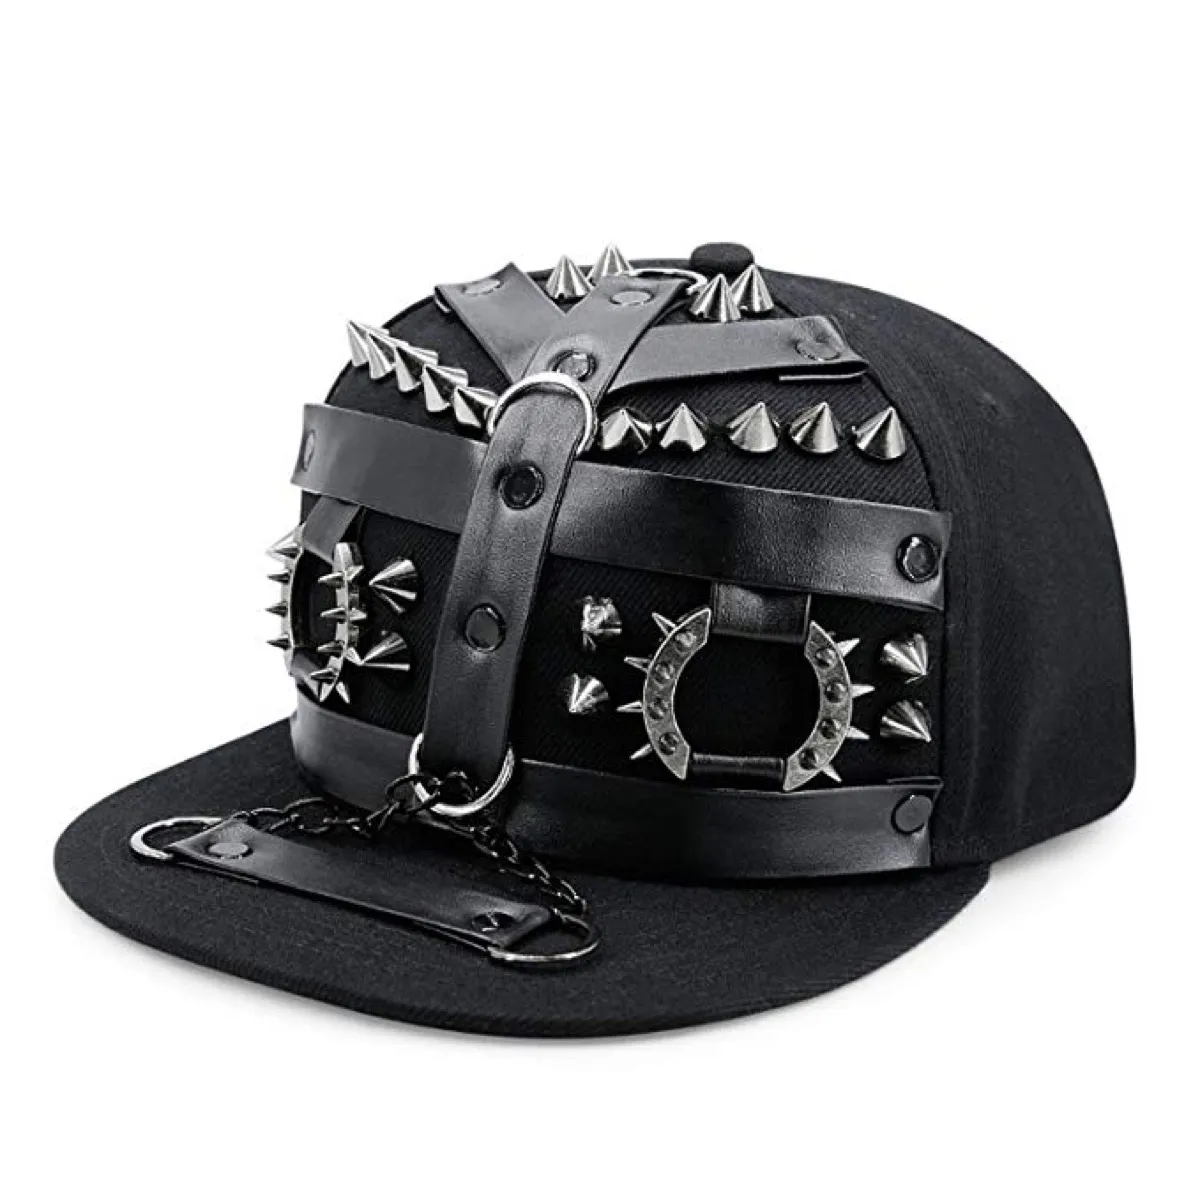 a black hat locks, bullets, and chain belts